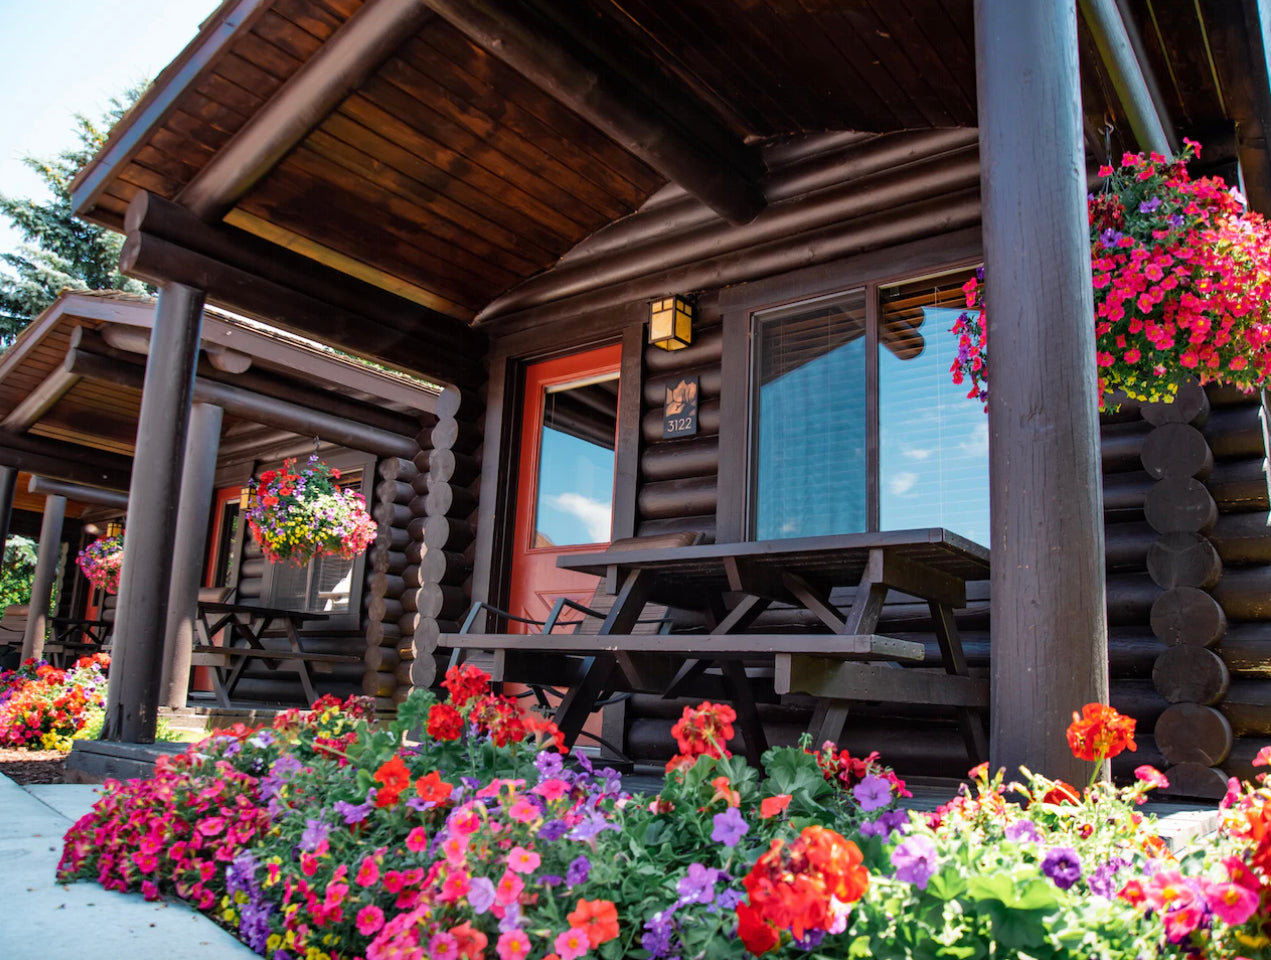  A log cabin exterior with vibrant flower boxes under the windows, a picnic table on the porch, and lush floral landscaping in the foreground, conveying a welcoming and rustic charm.